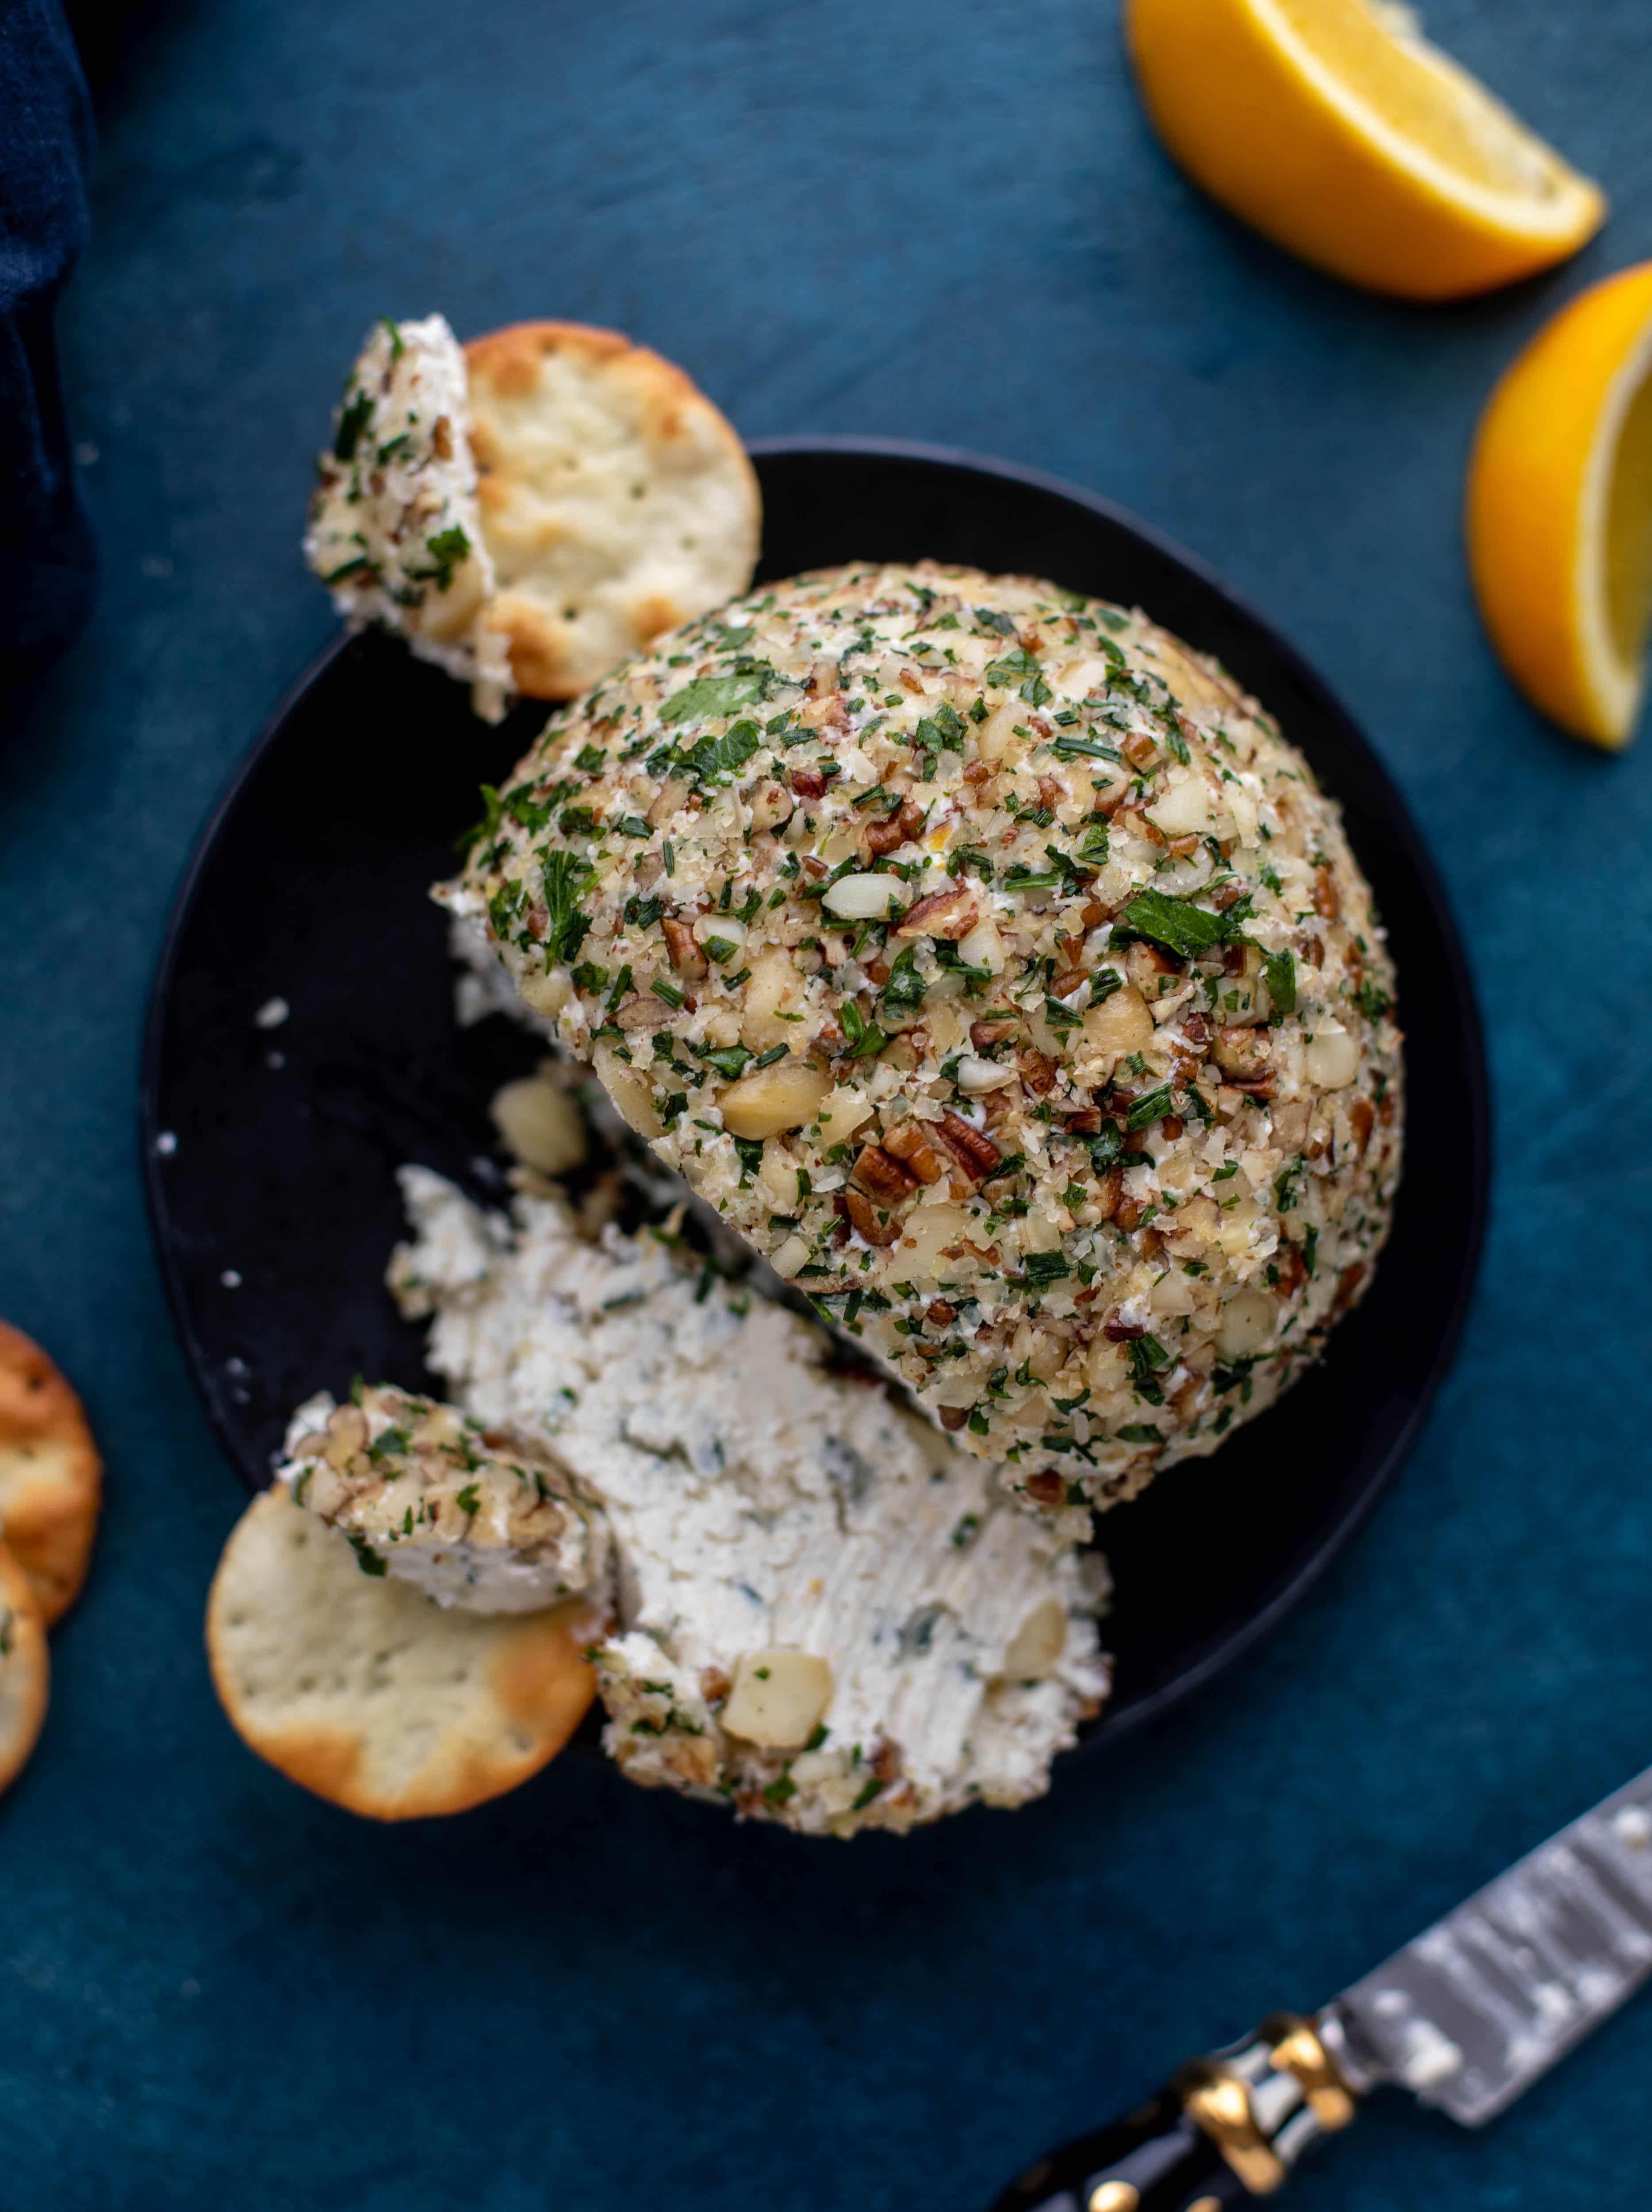 This macadamia nut cheeseball is flavored with fresh orange, spices, crispy sage and pecorino cheese. It's the perfect make-ahead snack!